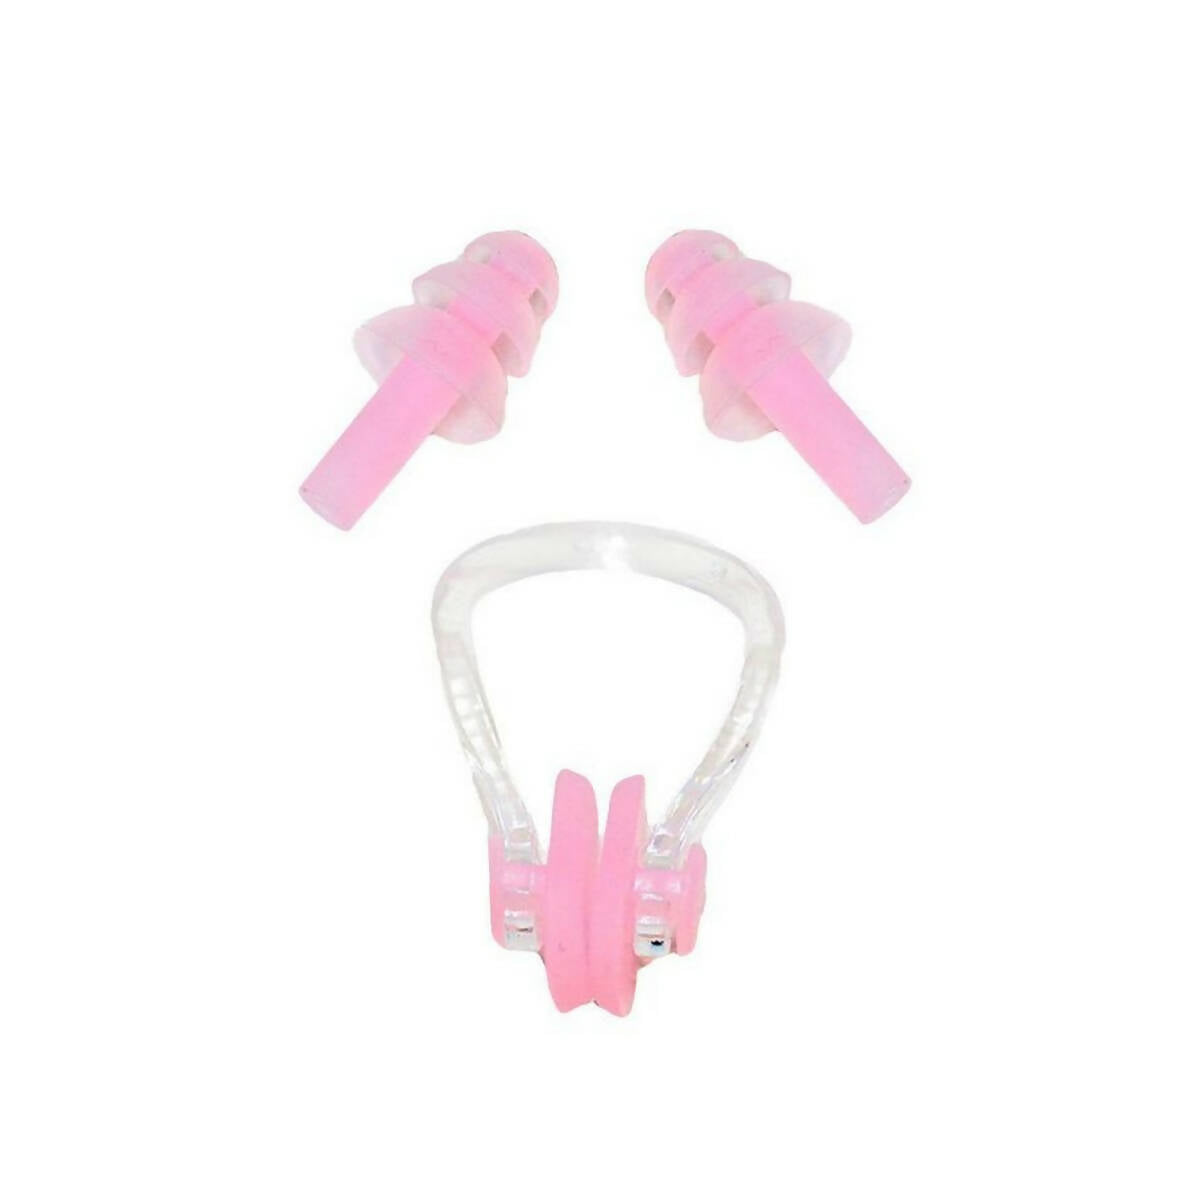 Soft Silicone Swimming Set Waterproof Nose Clip Ear Plug Set with Protective Case - Pink